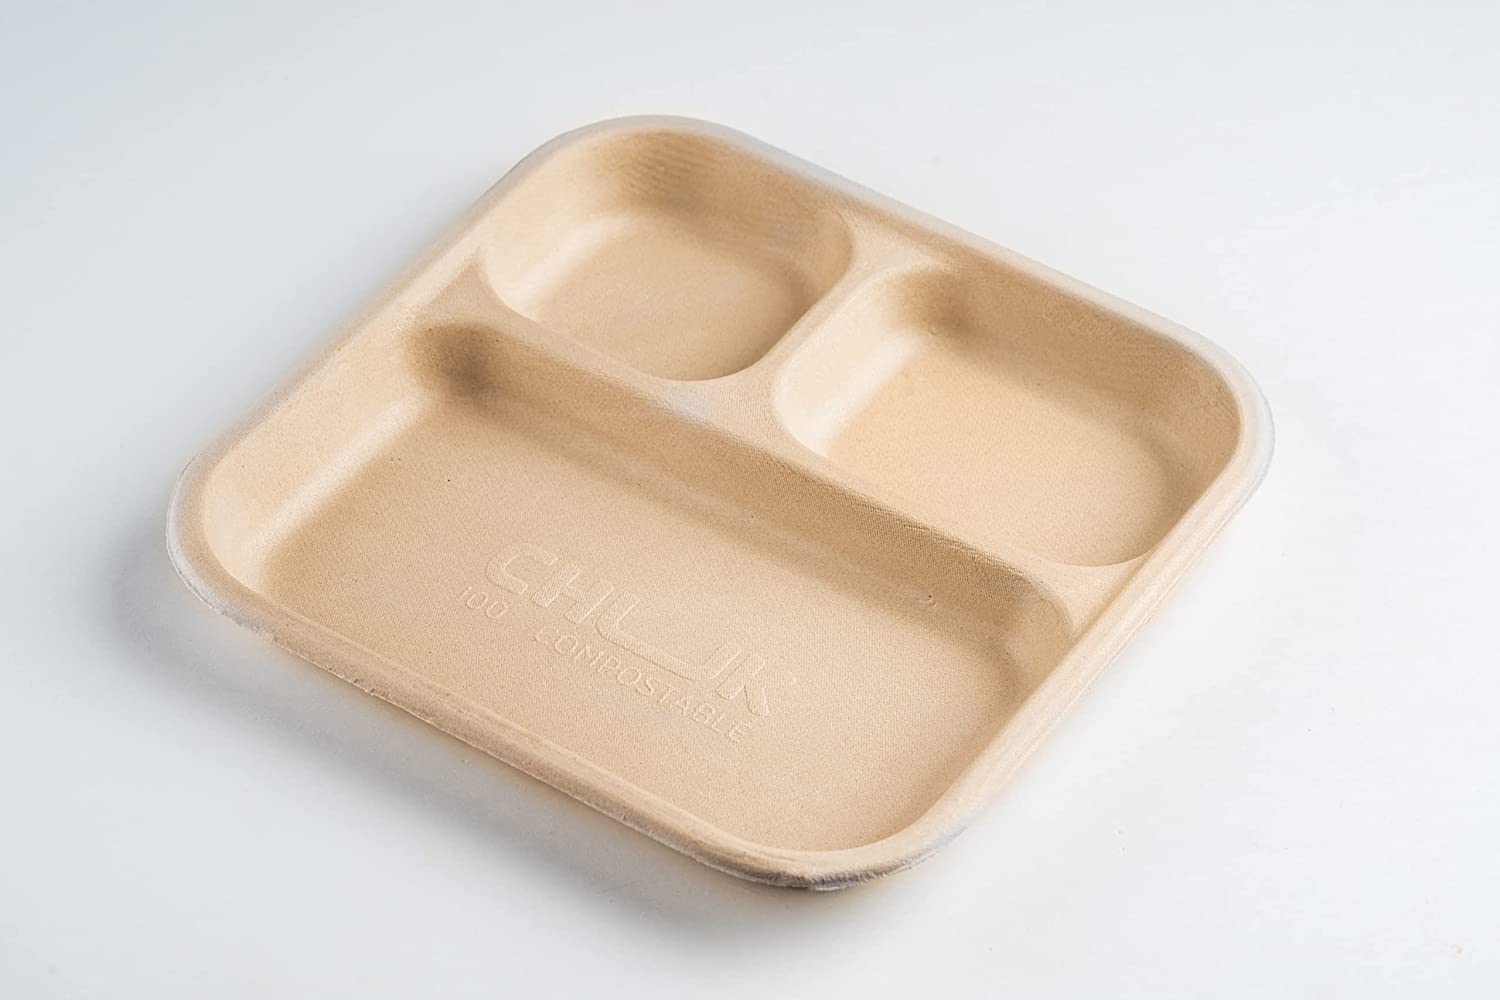 https://www.rudraeco.com/wp-content/uploads/2022/02/Chuk-BioDegradable-Disposable-and-Eco-Friendly-Meal-Tray-3-Compartment-%E2%80%93-Set-of-25-5.jpg